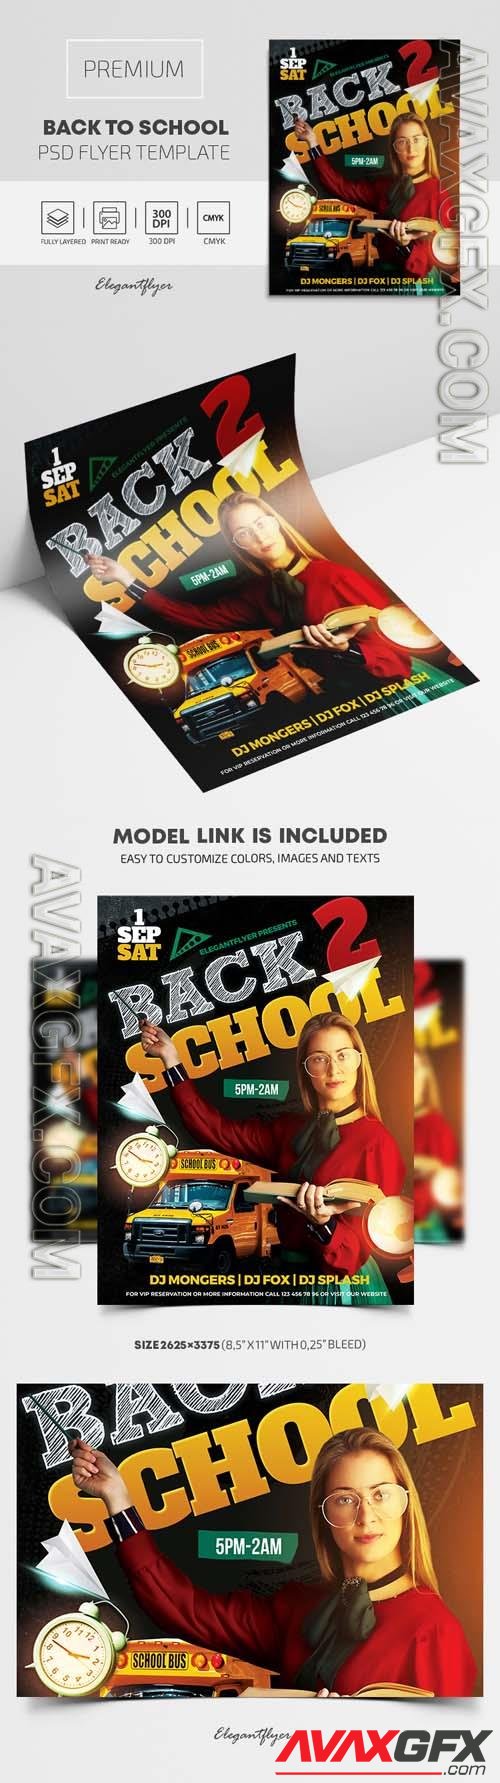 Back to School – Premium PSD Flyer Template